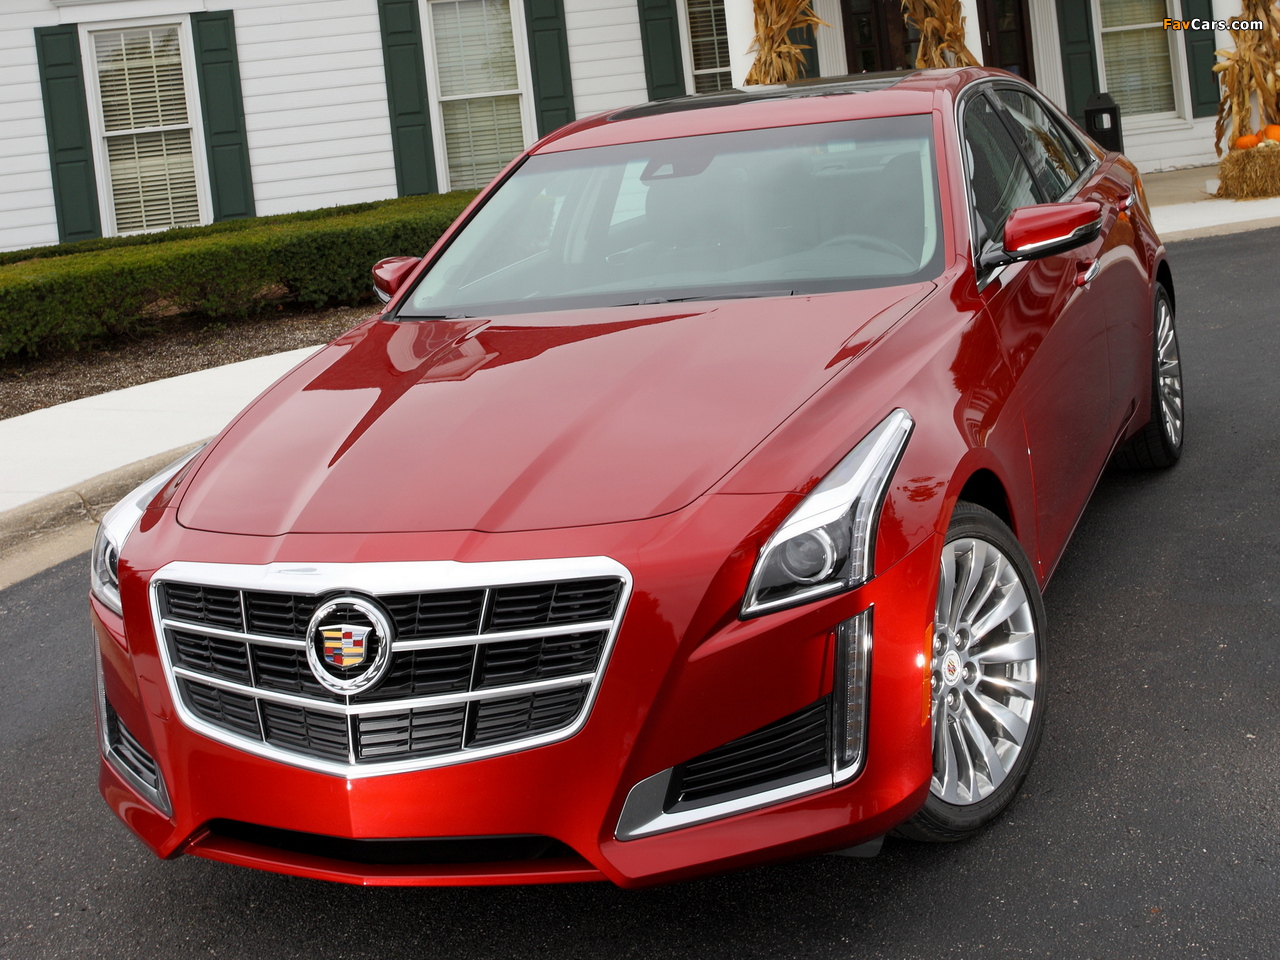 Cadillac CTS 2013 images (1280 x 960)